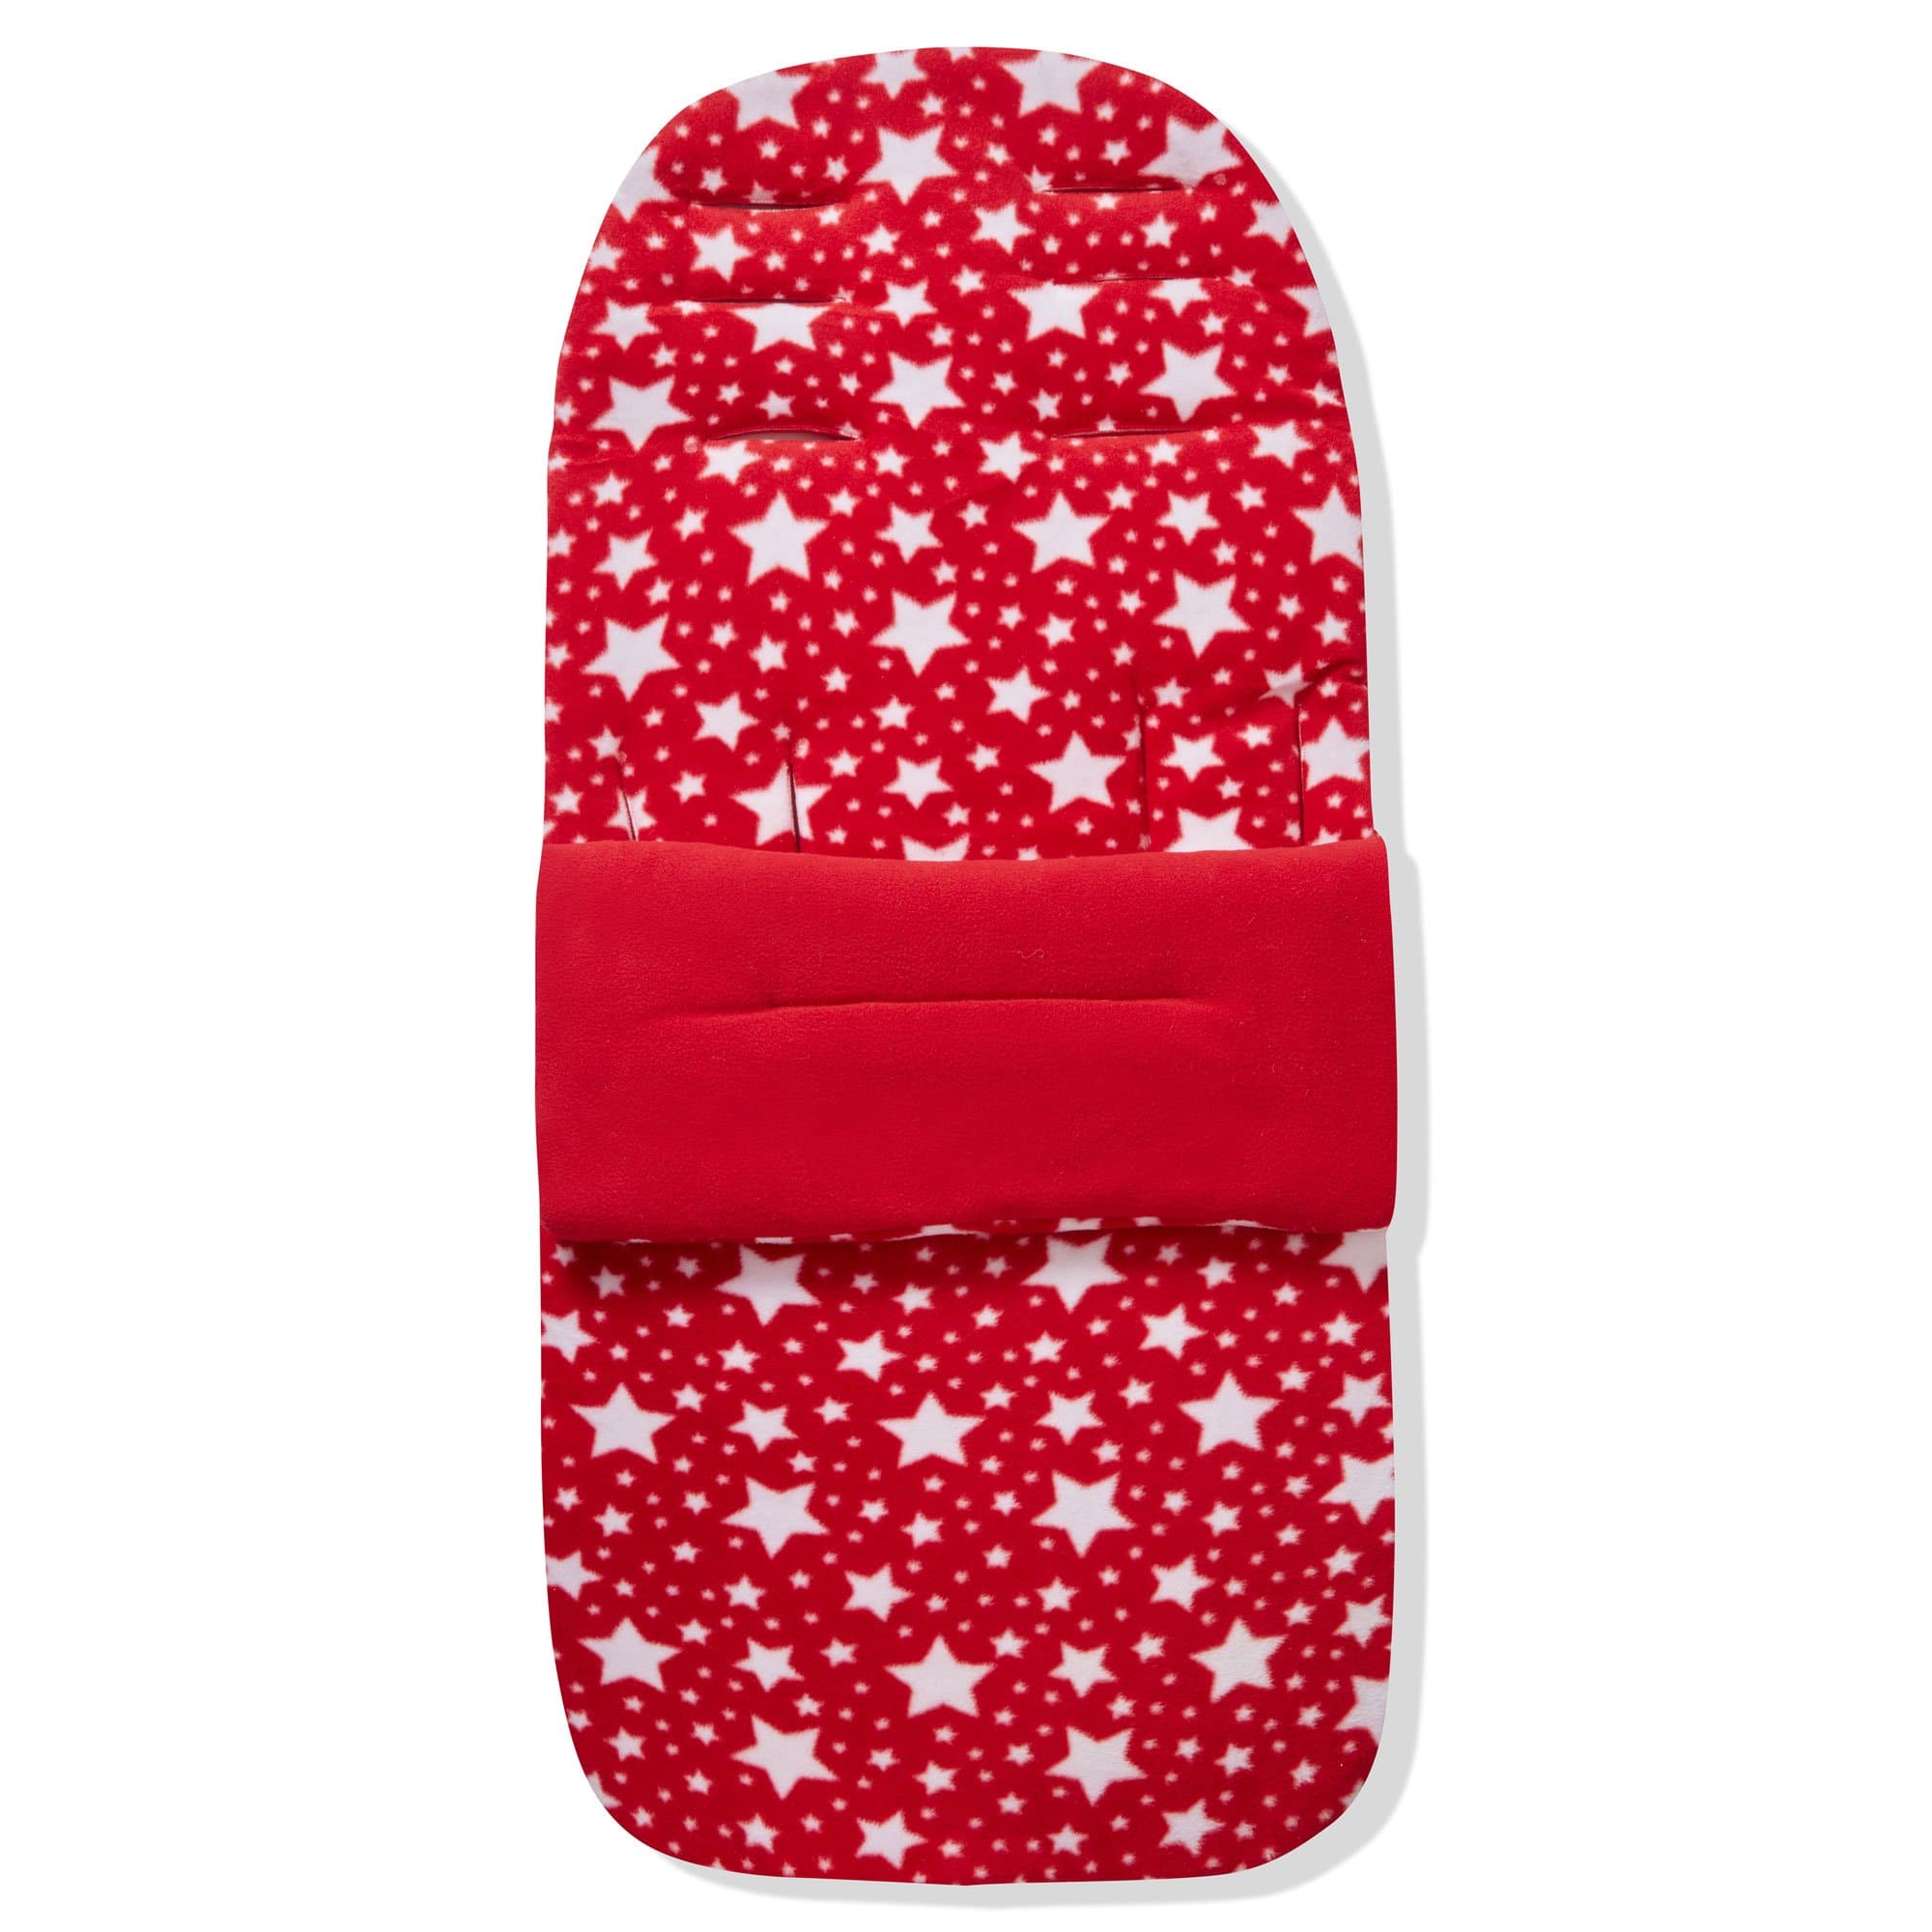 Fleece Footmuff / Cosy Toes Compatible with Roma - Red Star / Fits All Models | For Your Little One